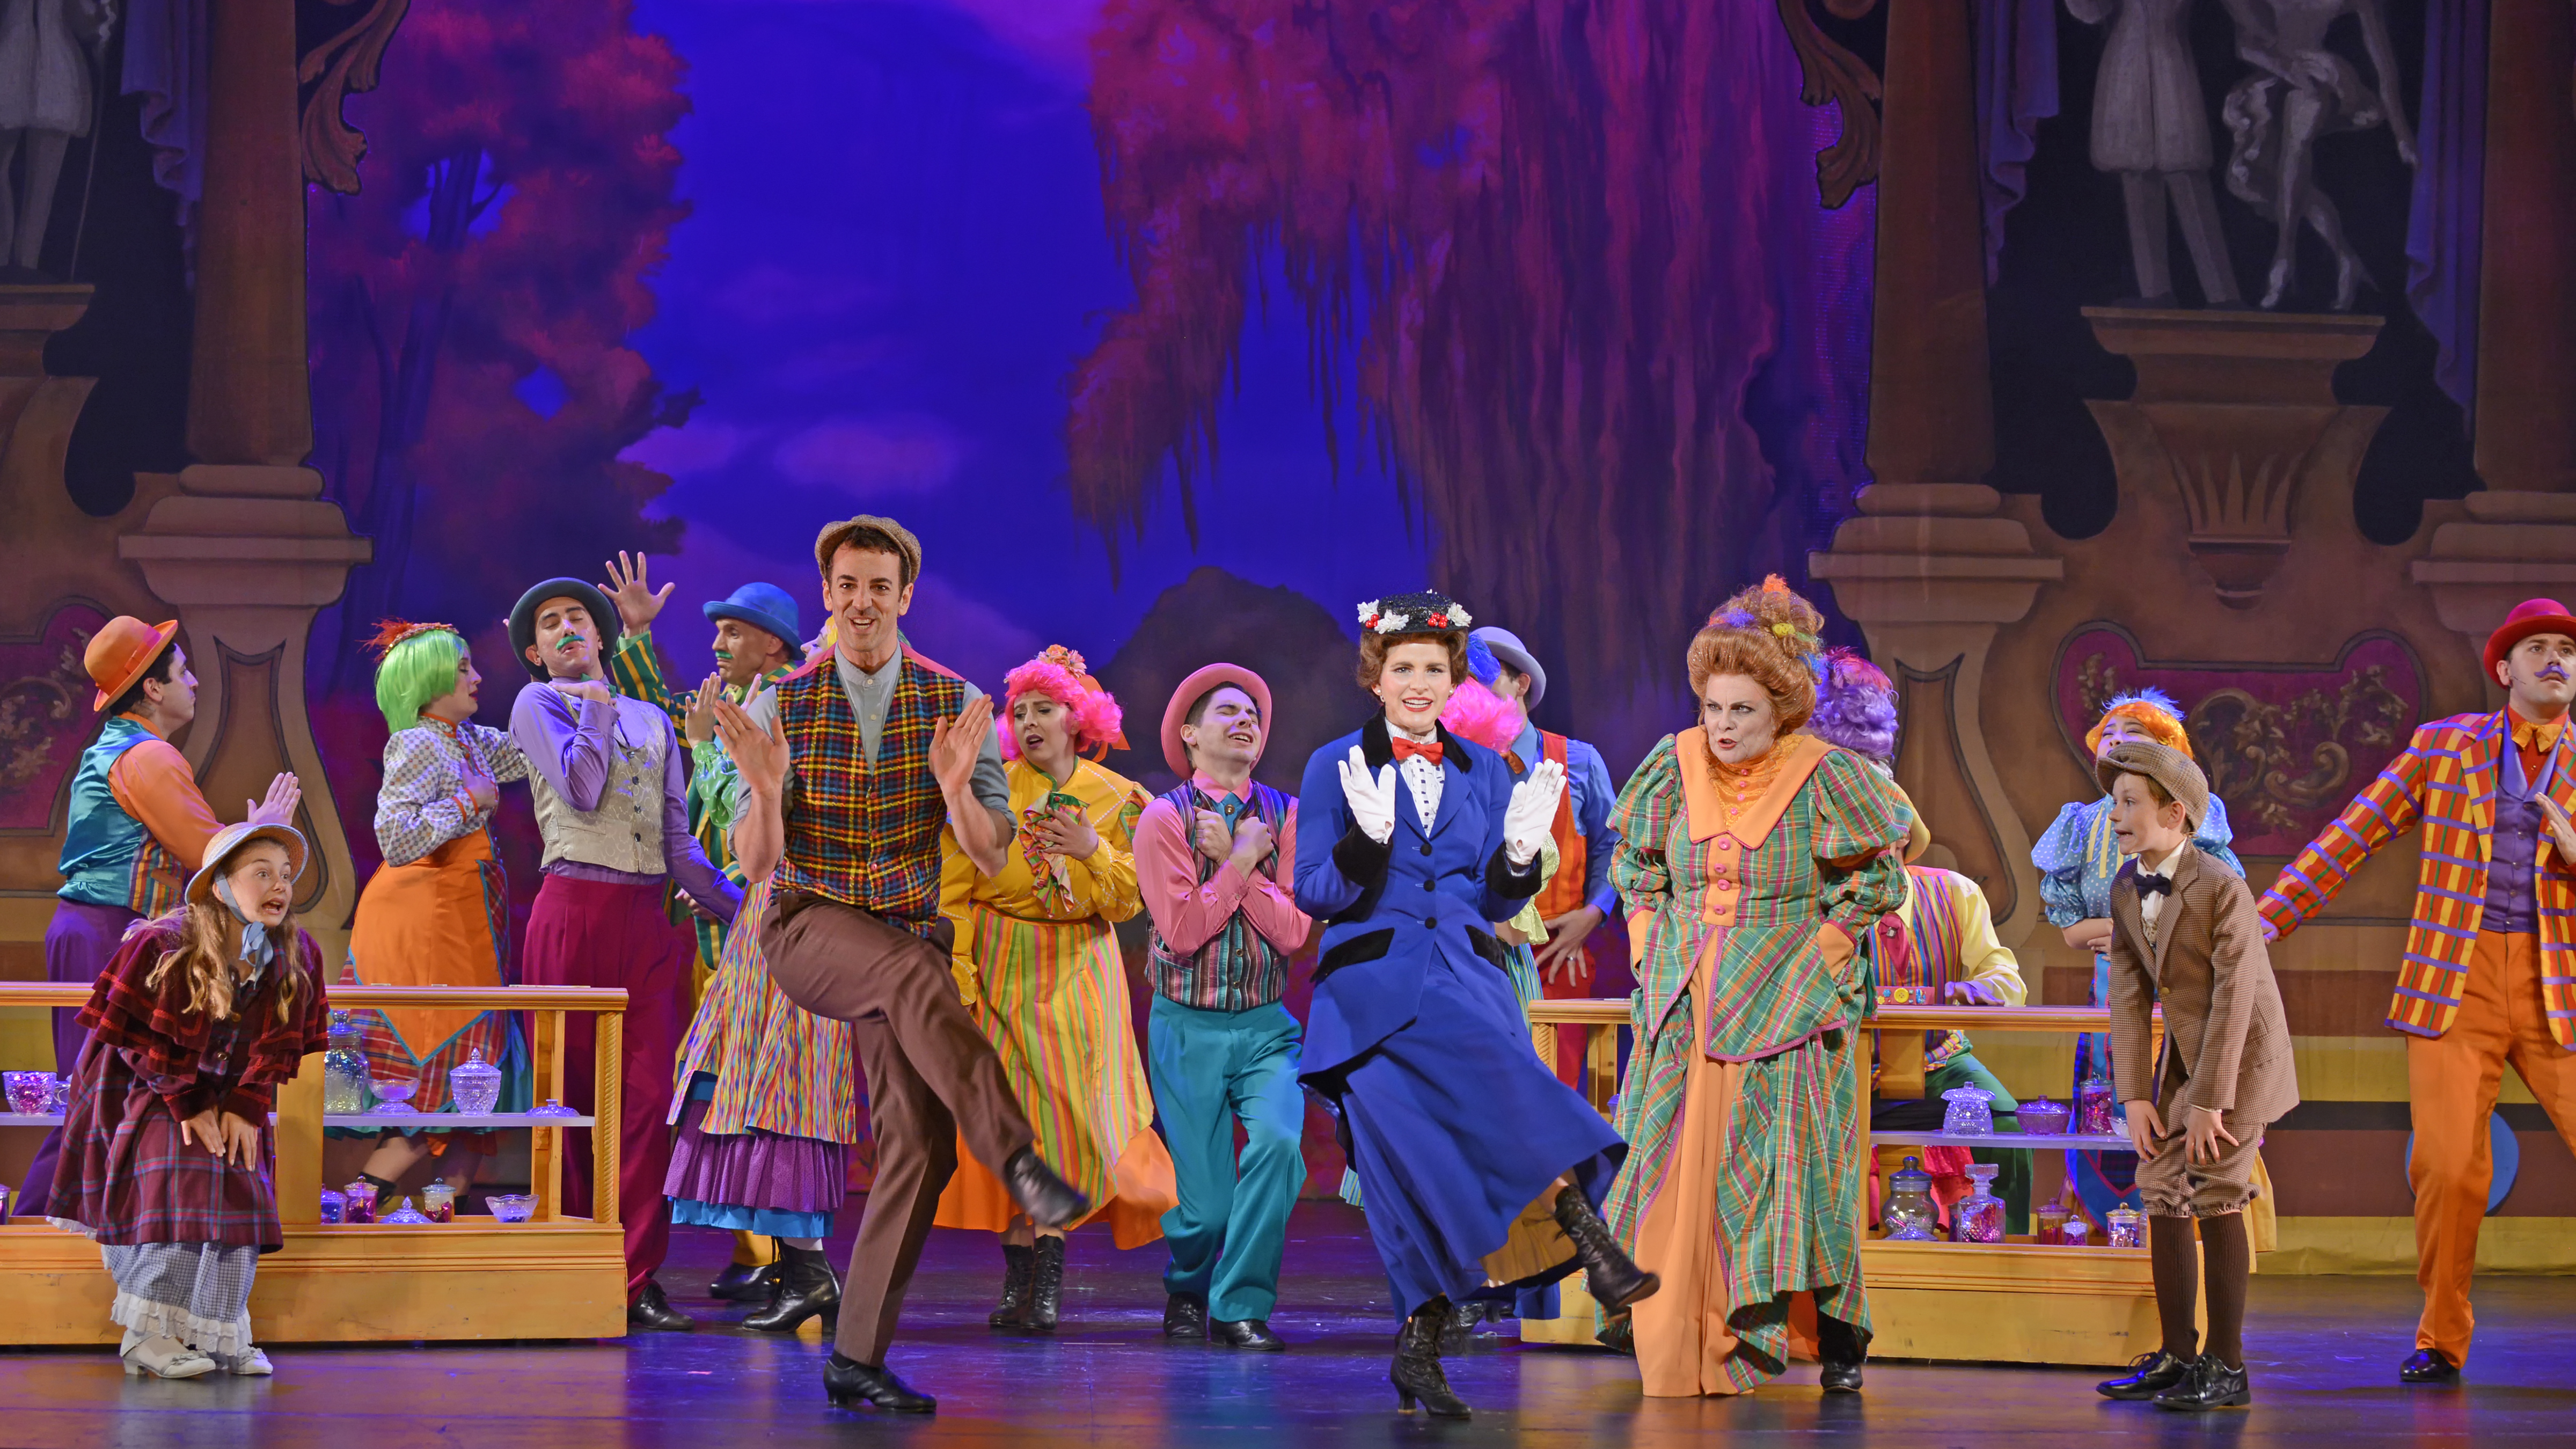 Musical Theatre West presents: Mary Poppins @ Carpenter Performing Arts Center in Long Beach – Review